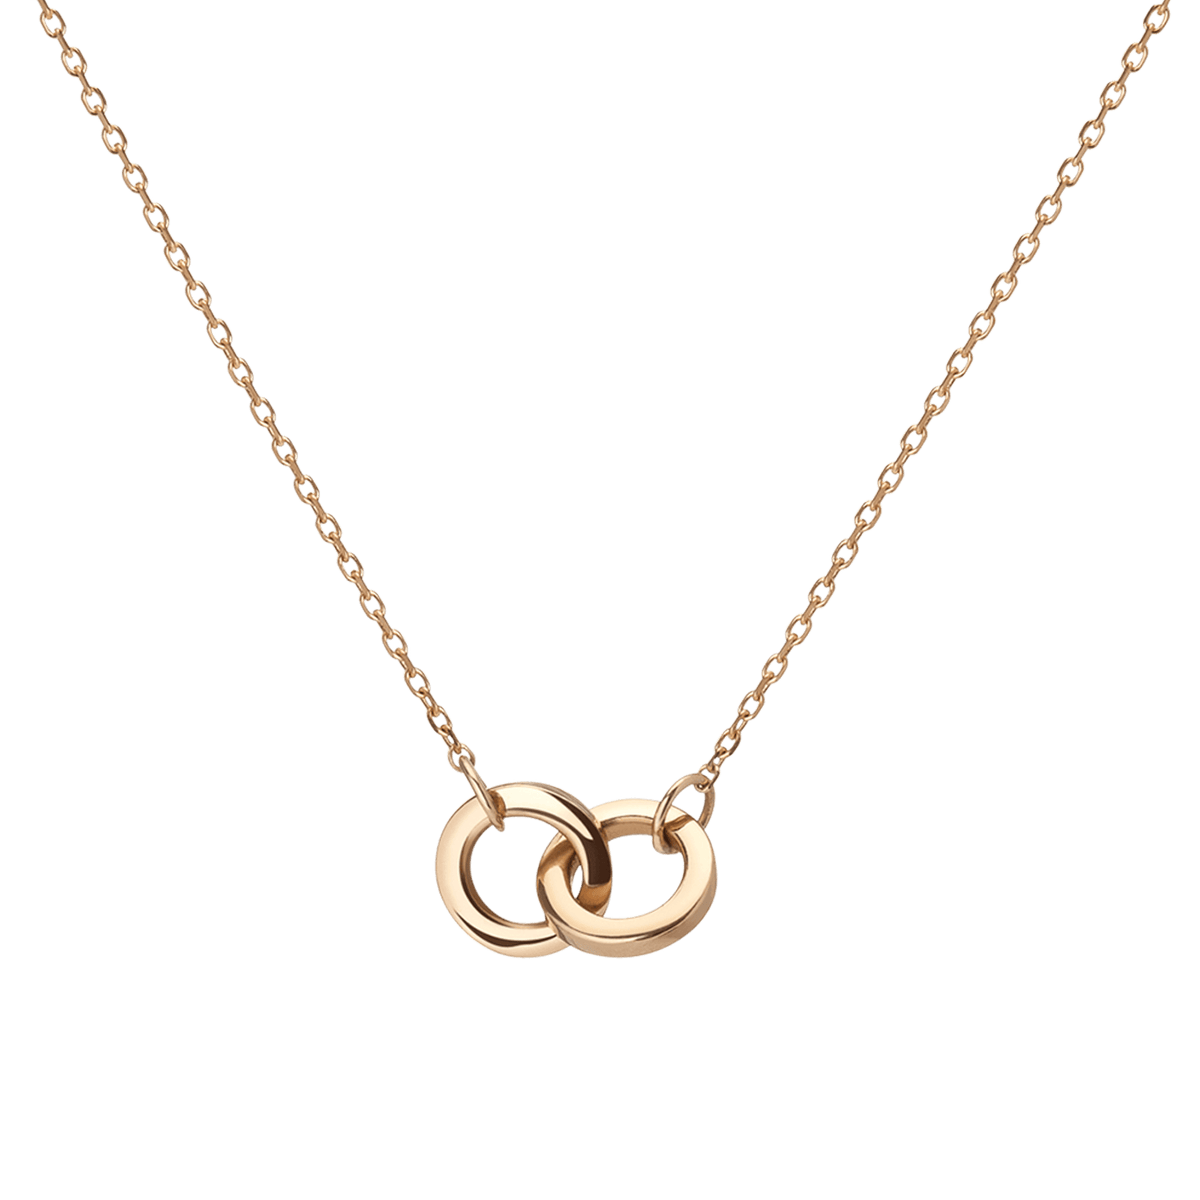 Aurate New York Connection Necklace, 14K Yellow Gold